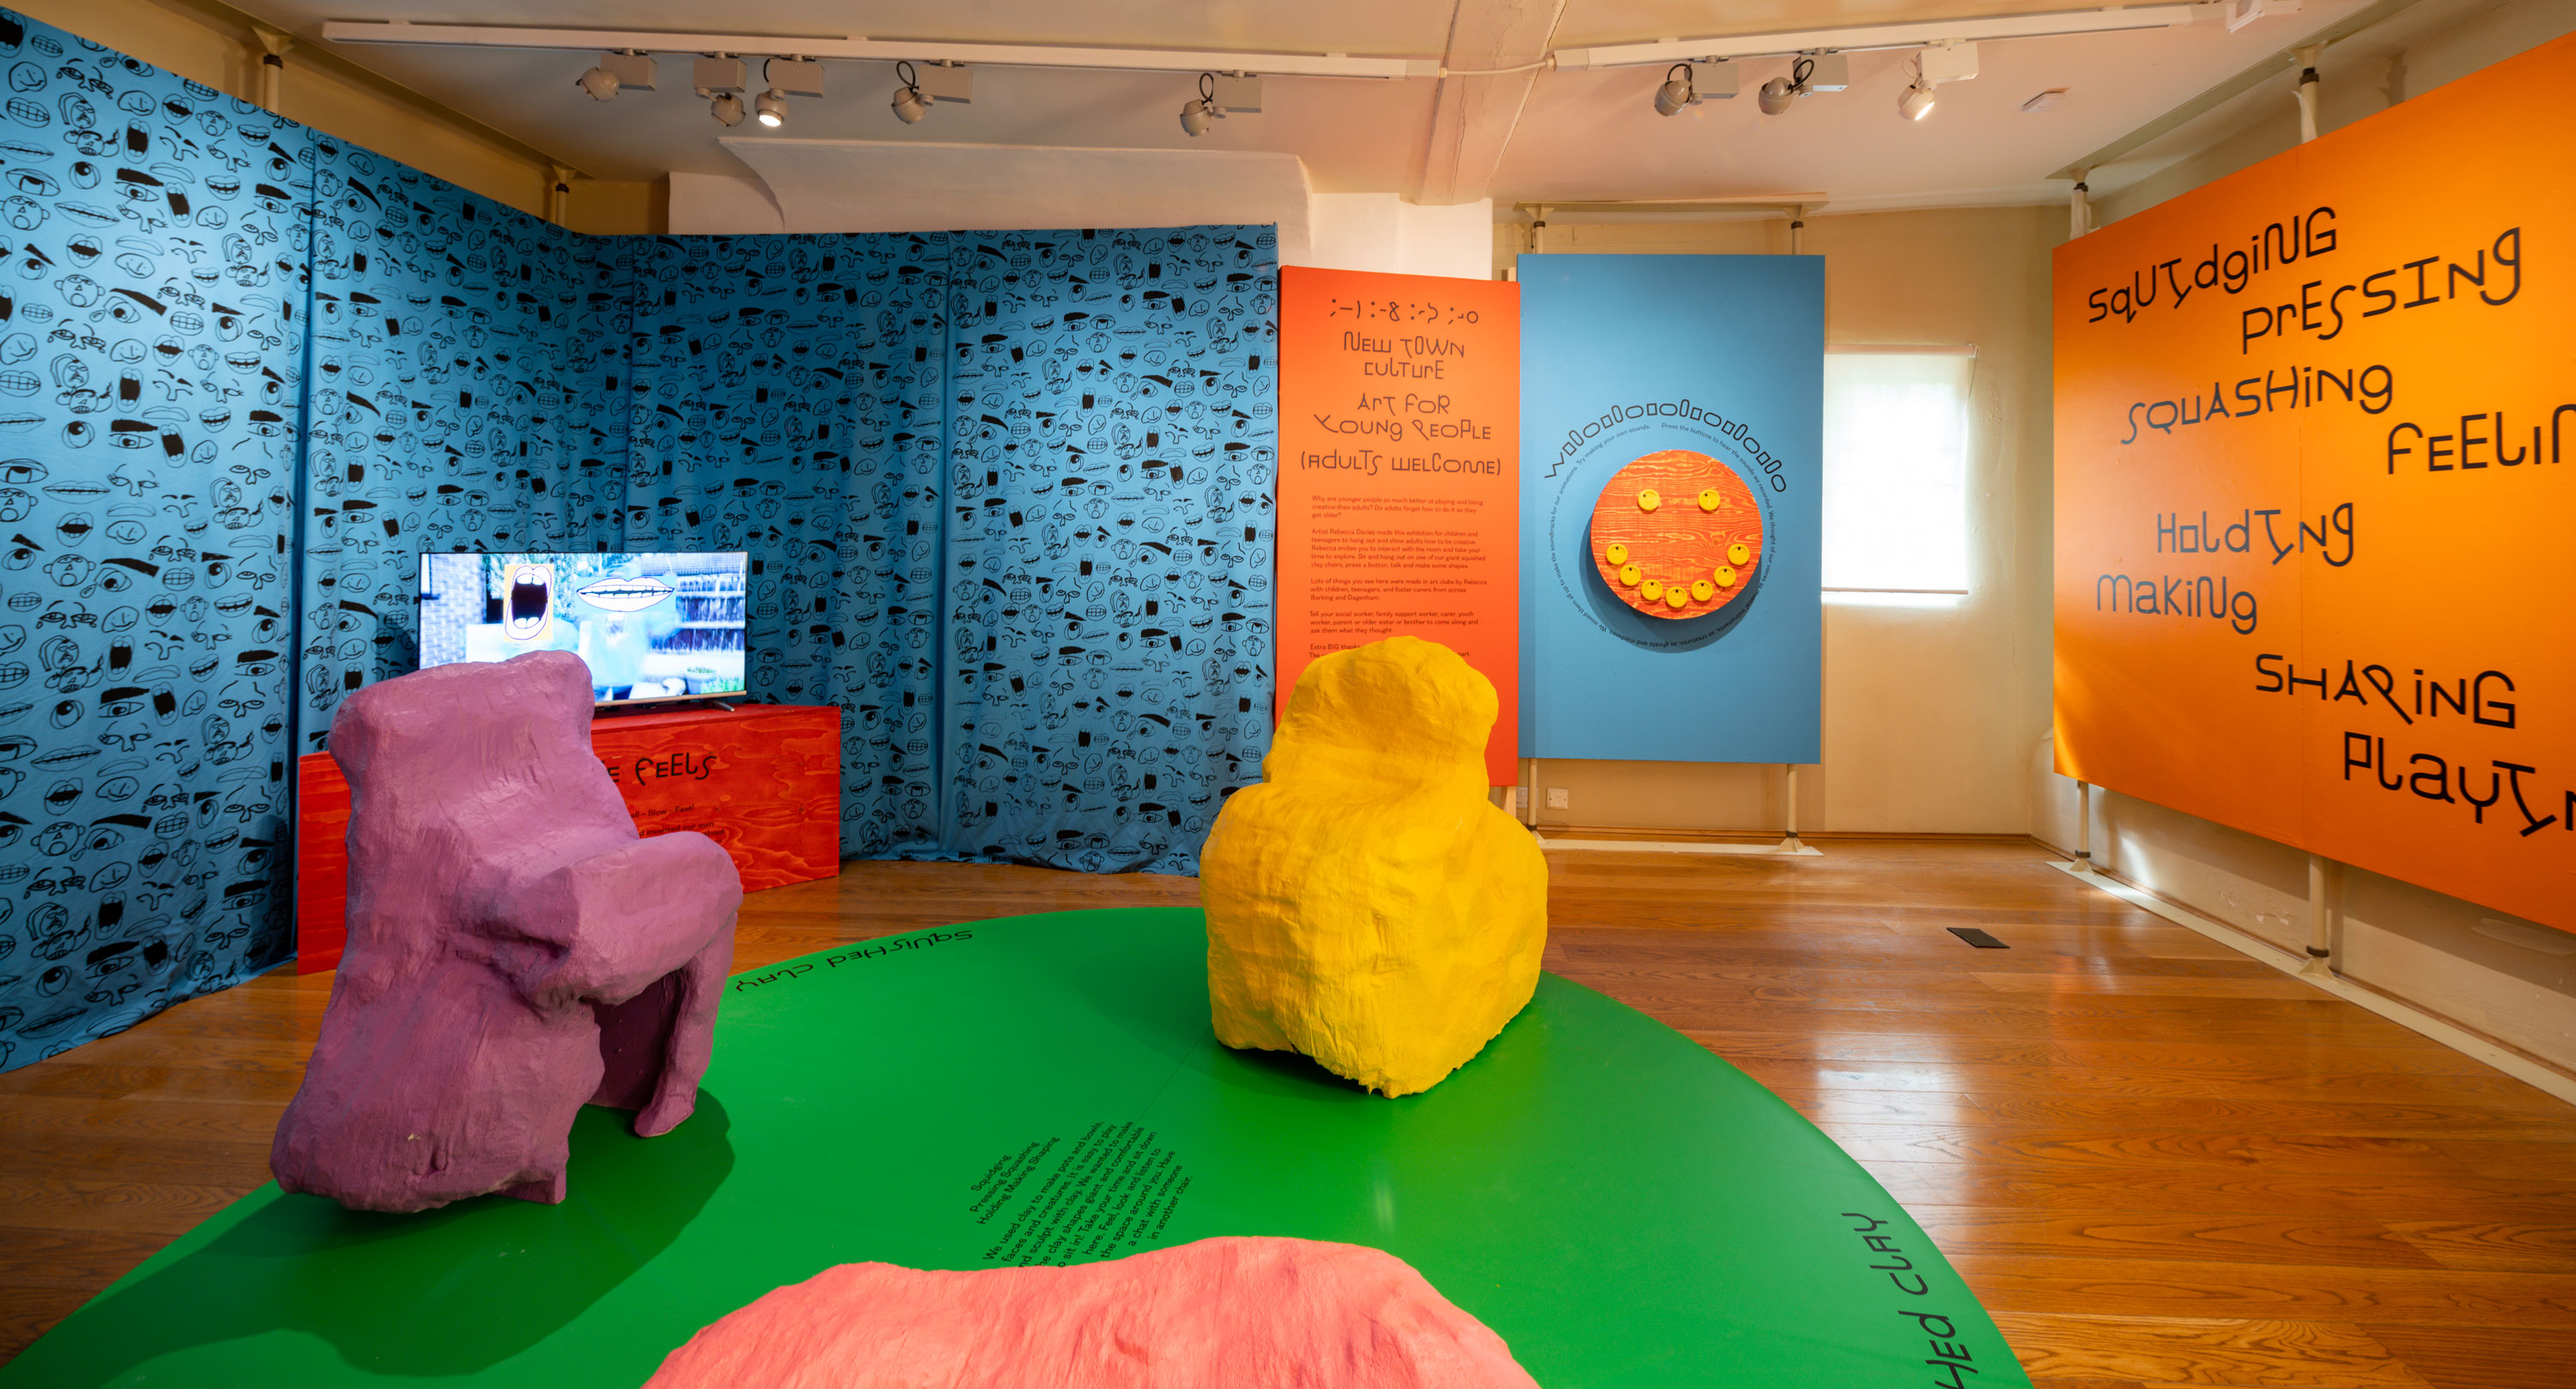 Exhibition space with bright blue wall hangings, orange painted walls, large screens showing art films and two very large purple and yellow chairs